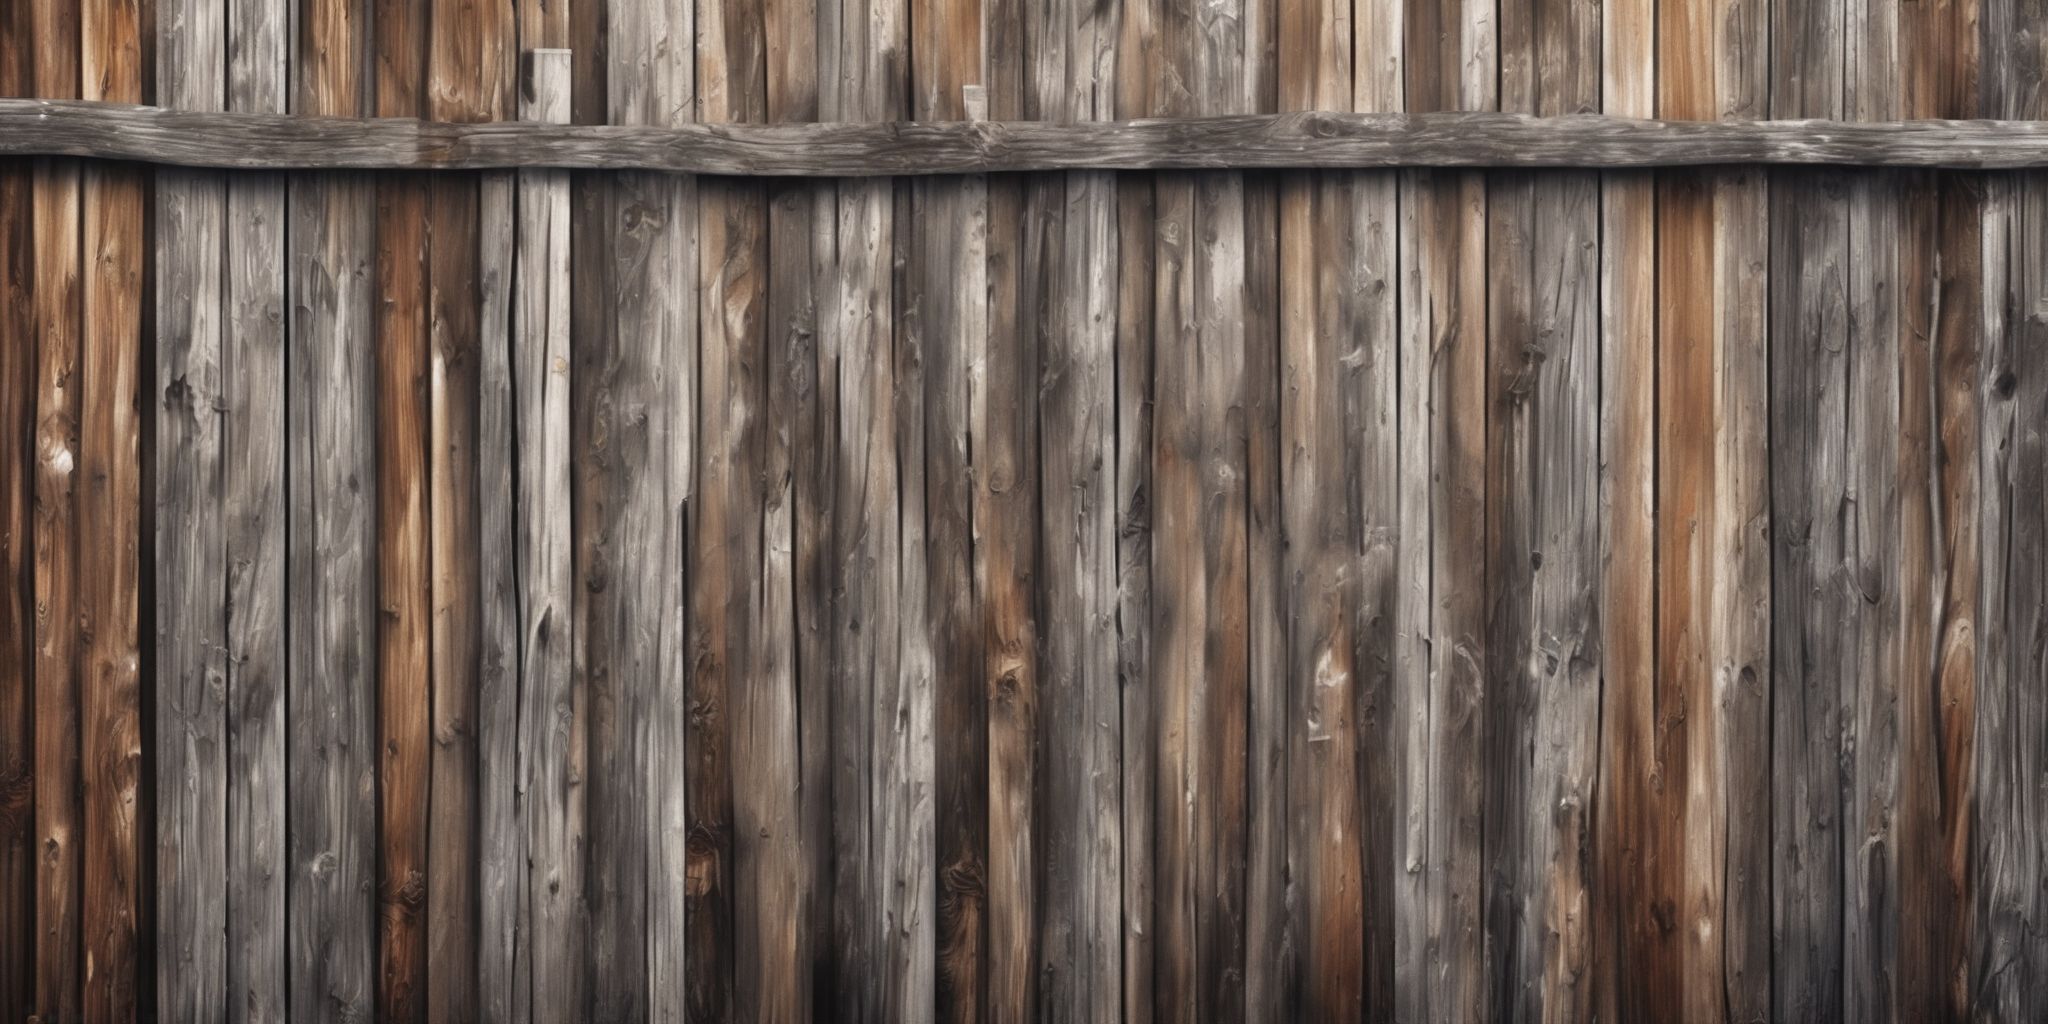 Fence  in realistic, photographic style